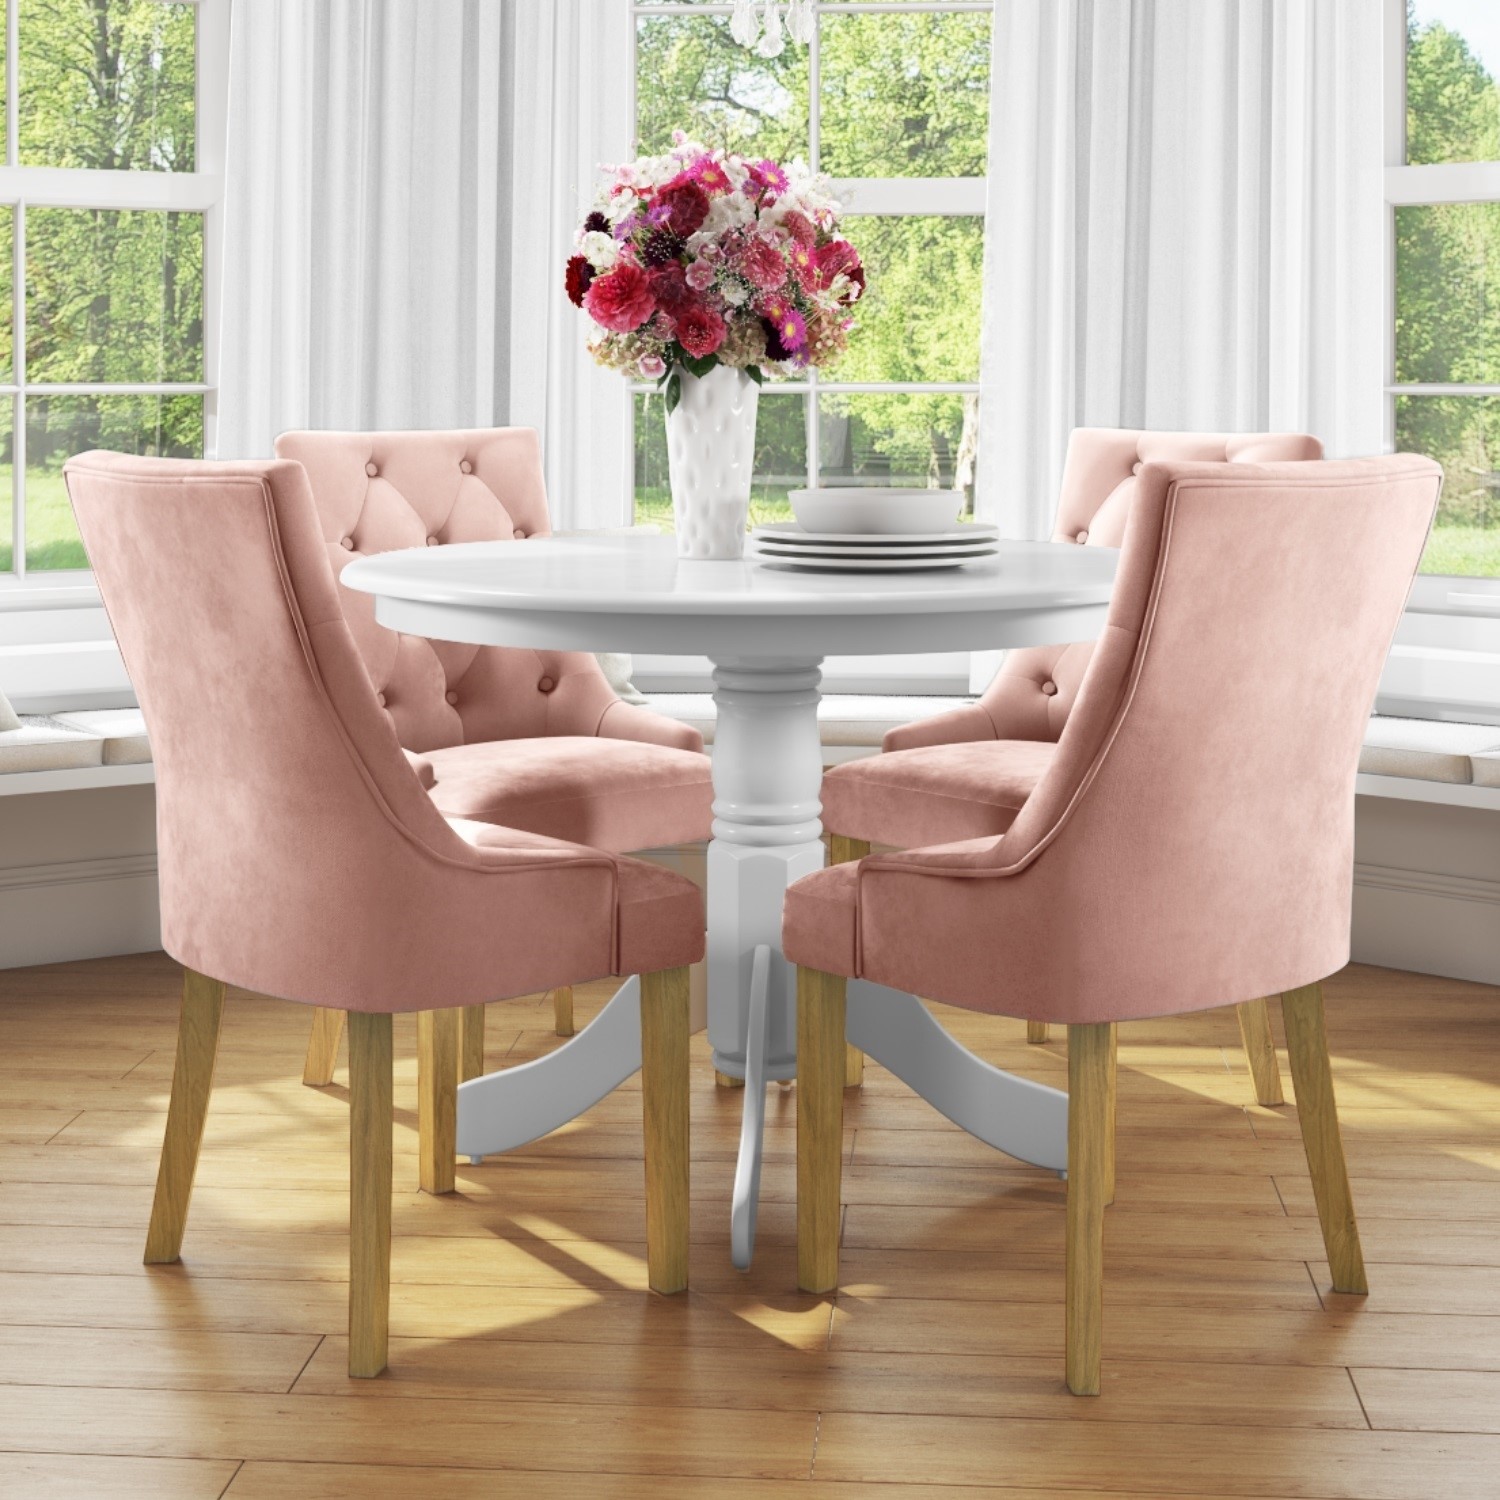 Small Round Dining Table In White With 4 Velvet Chairs In Pink Rhode Island Kaylee Furniture123